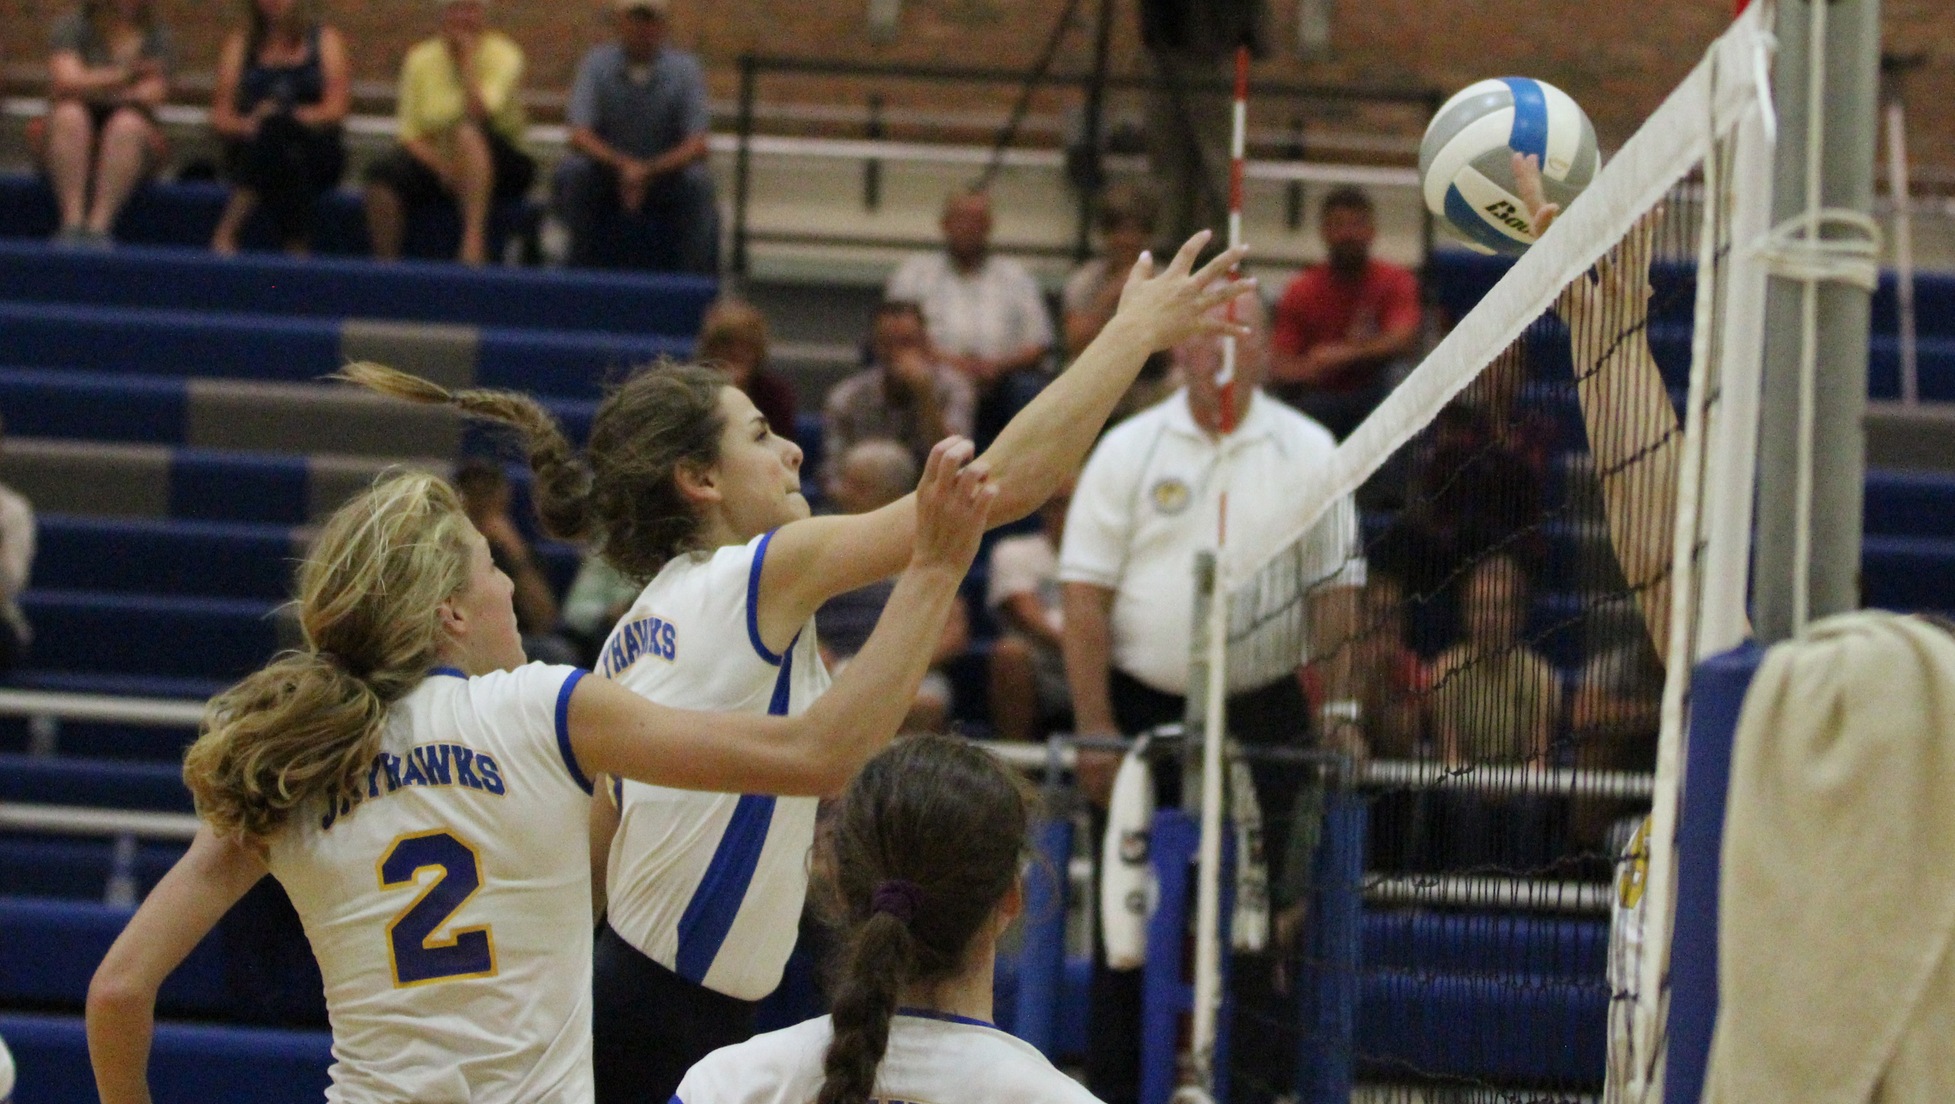 Muskegon Community College goes up for a block against Ancilla College
Photo: Muskegon Community College